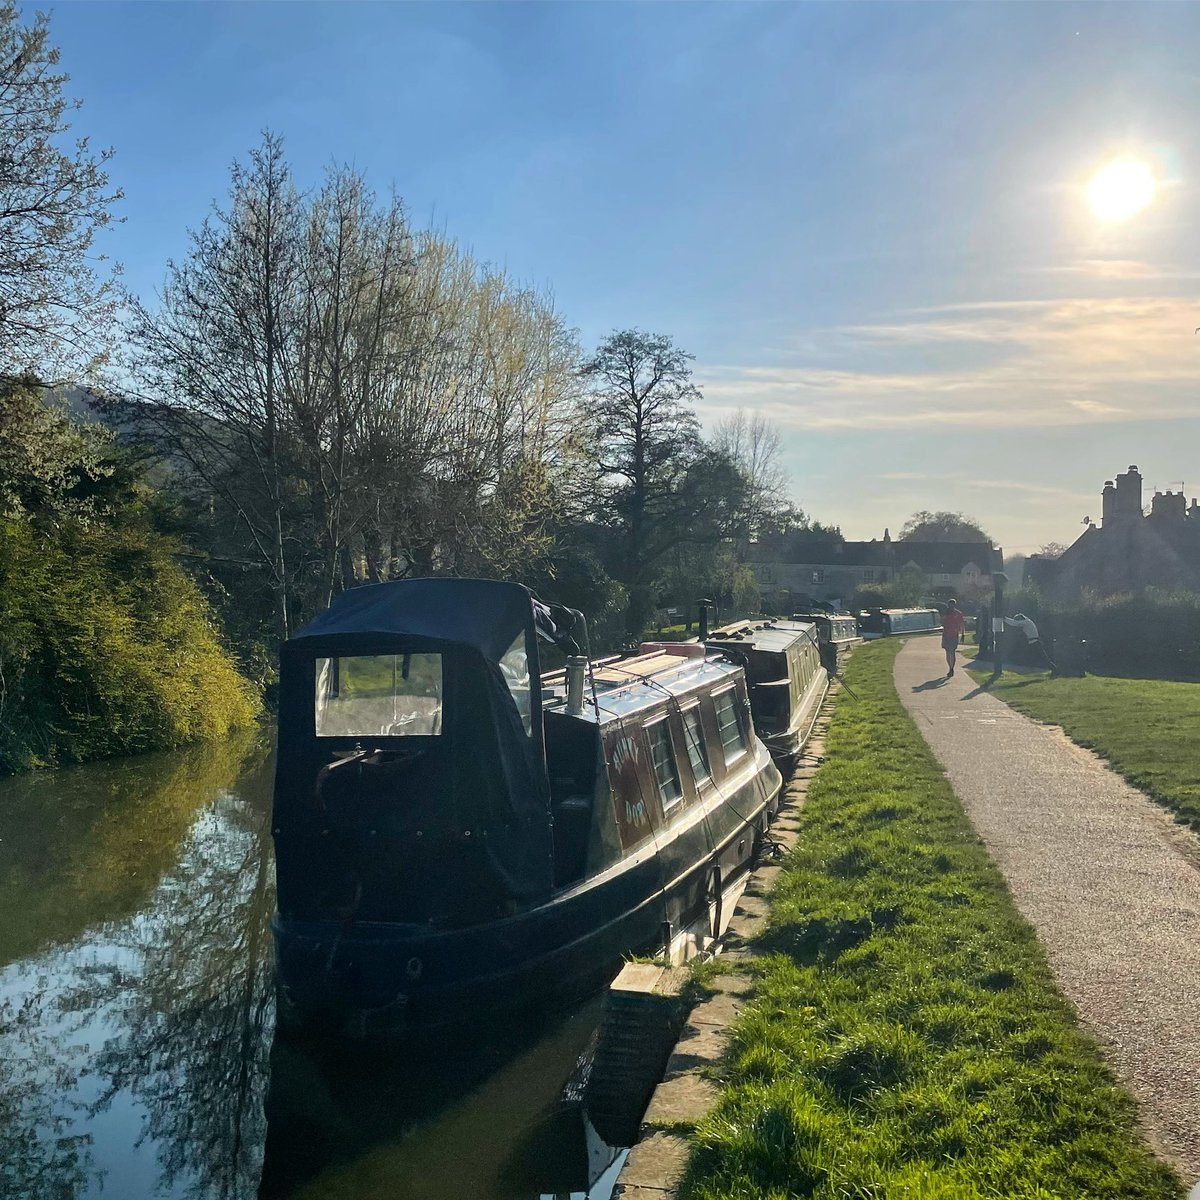 What a day to wave off our latest guests! Enjoy! 👋💙⚓️#hunkydorydays #hunkydory #boatholiday #sunshine #sunnyday #springtime #lifesbetterbywater #narrowboat #narrowboatholidays #Narrowboathire #narrowboatlife #canalrivertrust #canalboat #canalboatholidays #canalboathire #canals